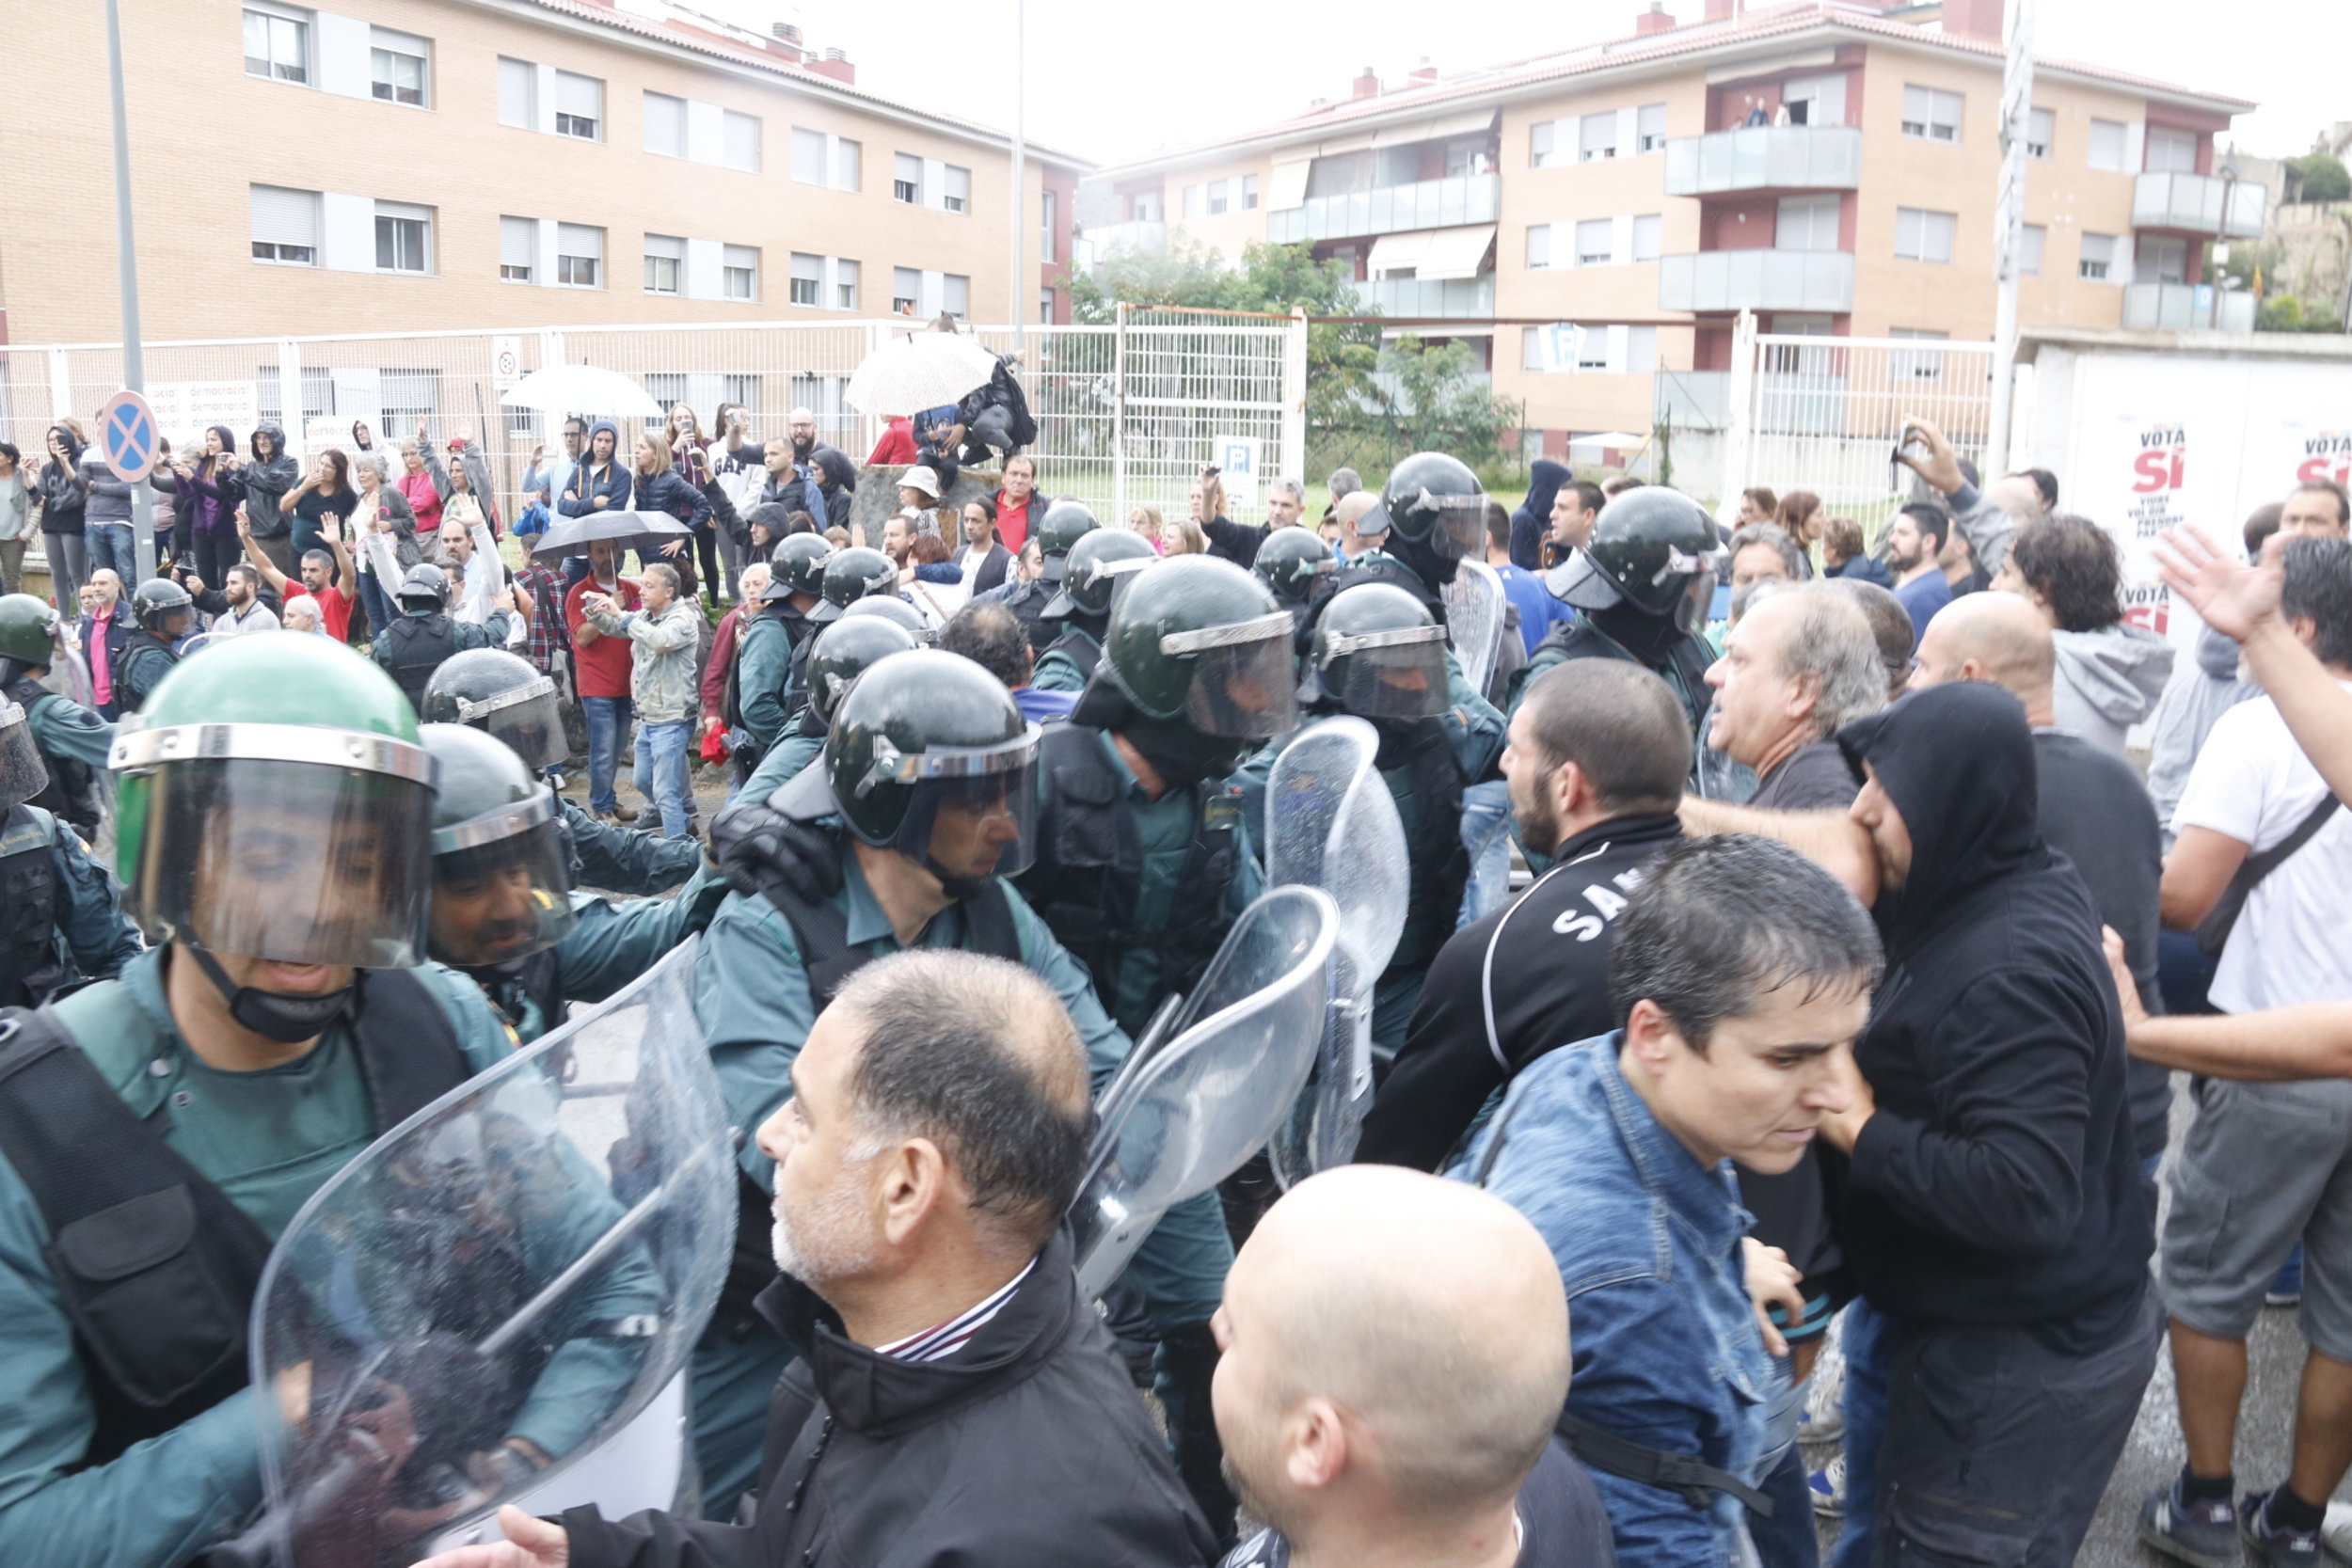 Spanish Guardia Civil police officers clash with voters on referendum day (by Jordi Pujolar)